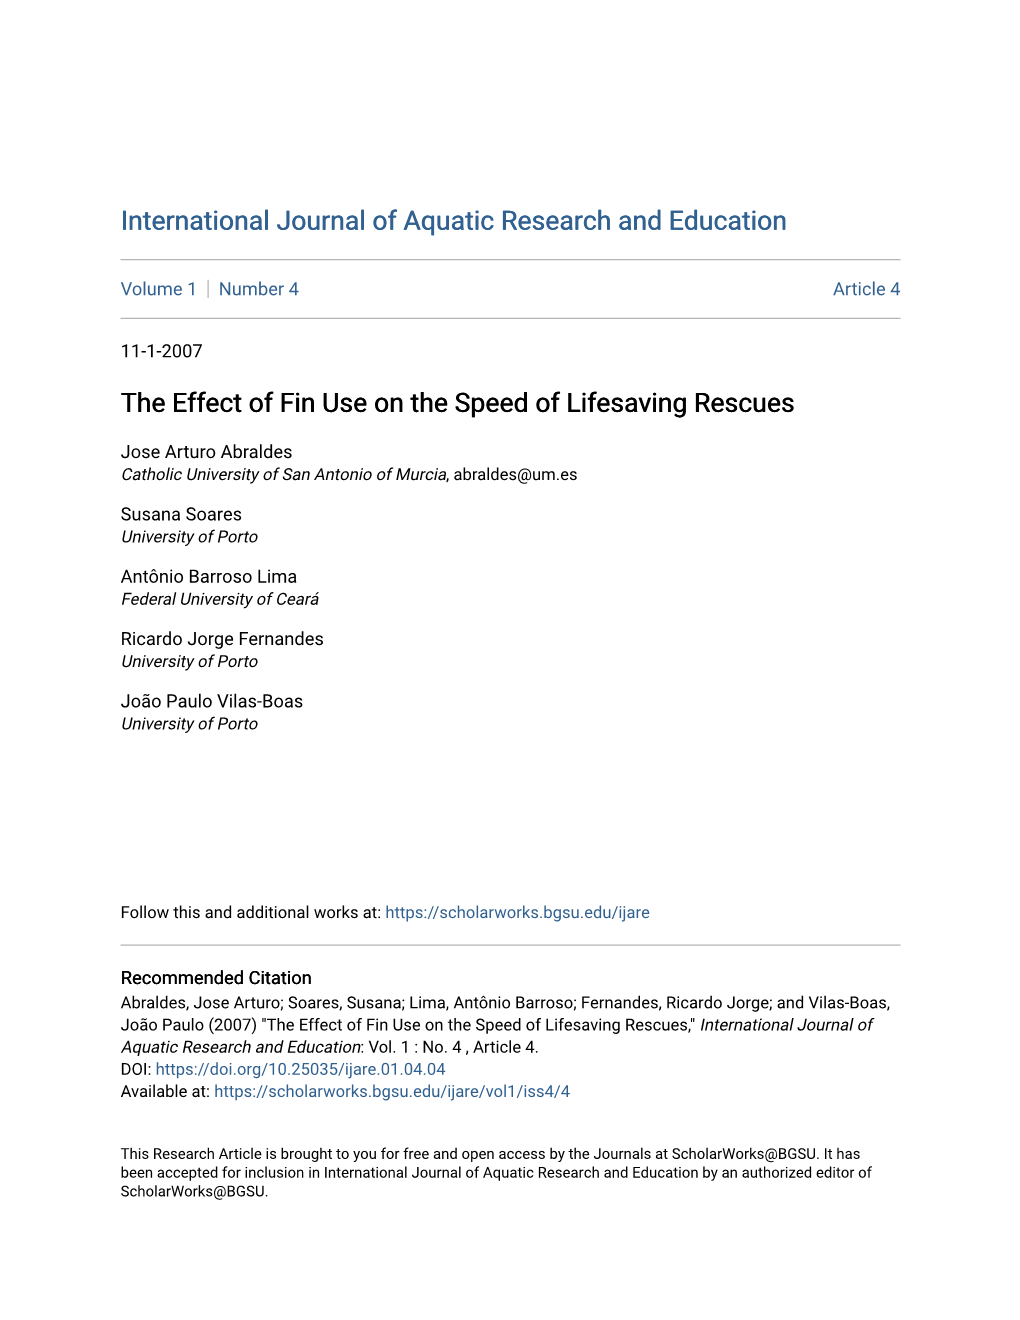 The Effect of Fin Use on the Speed of Lifesaving Rescues